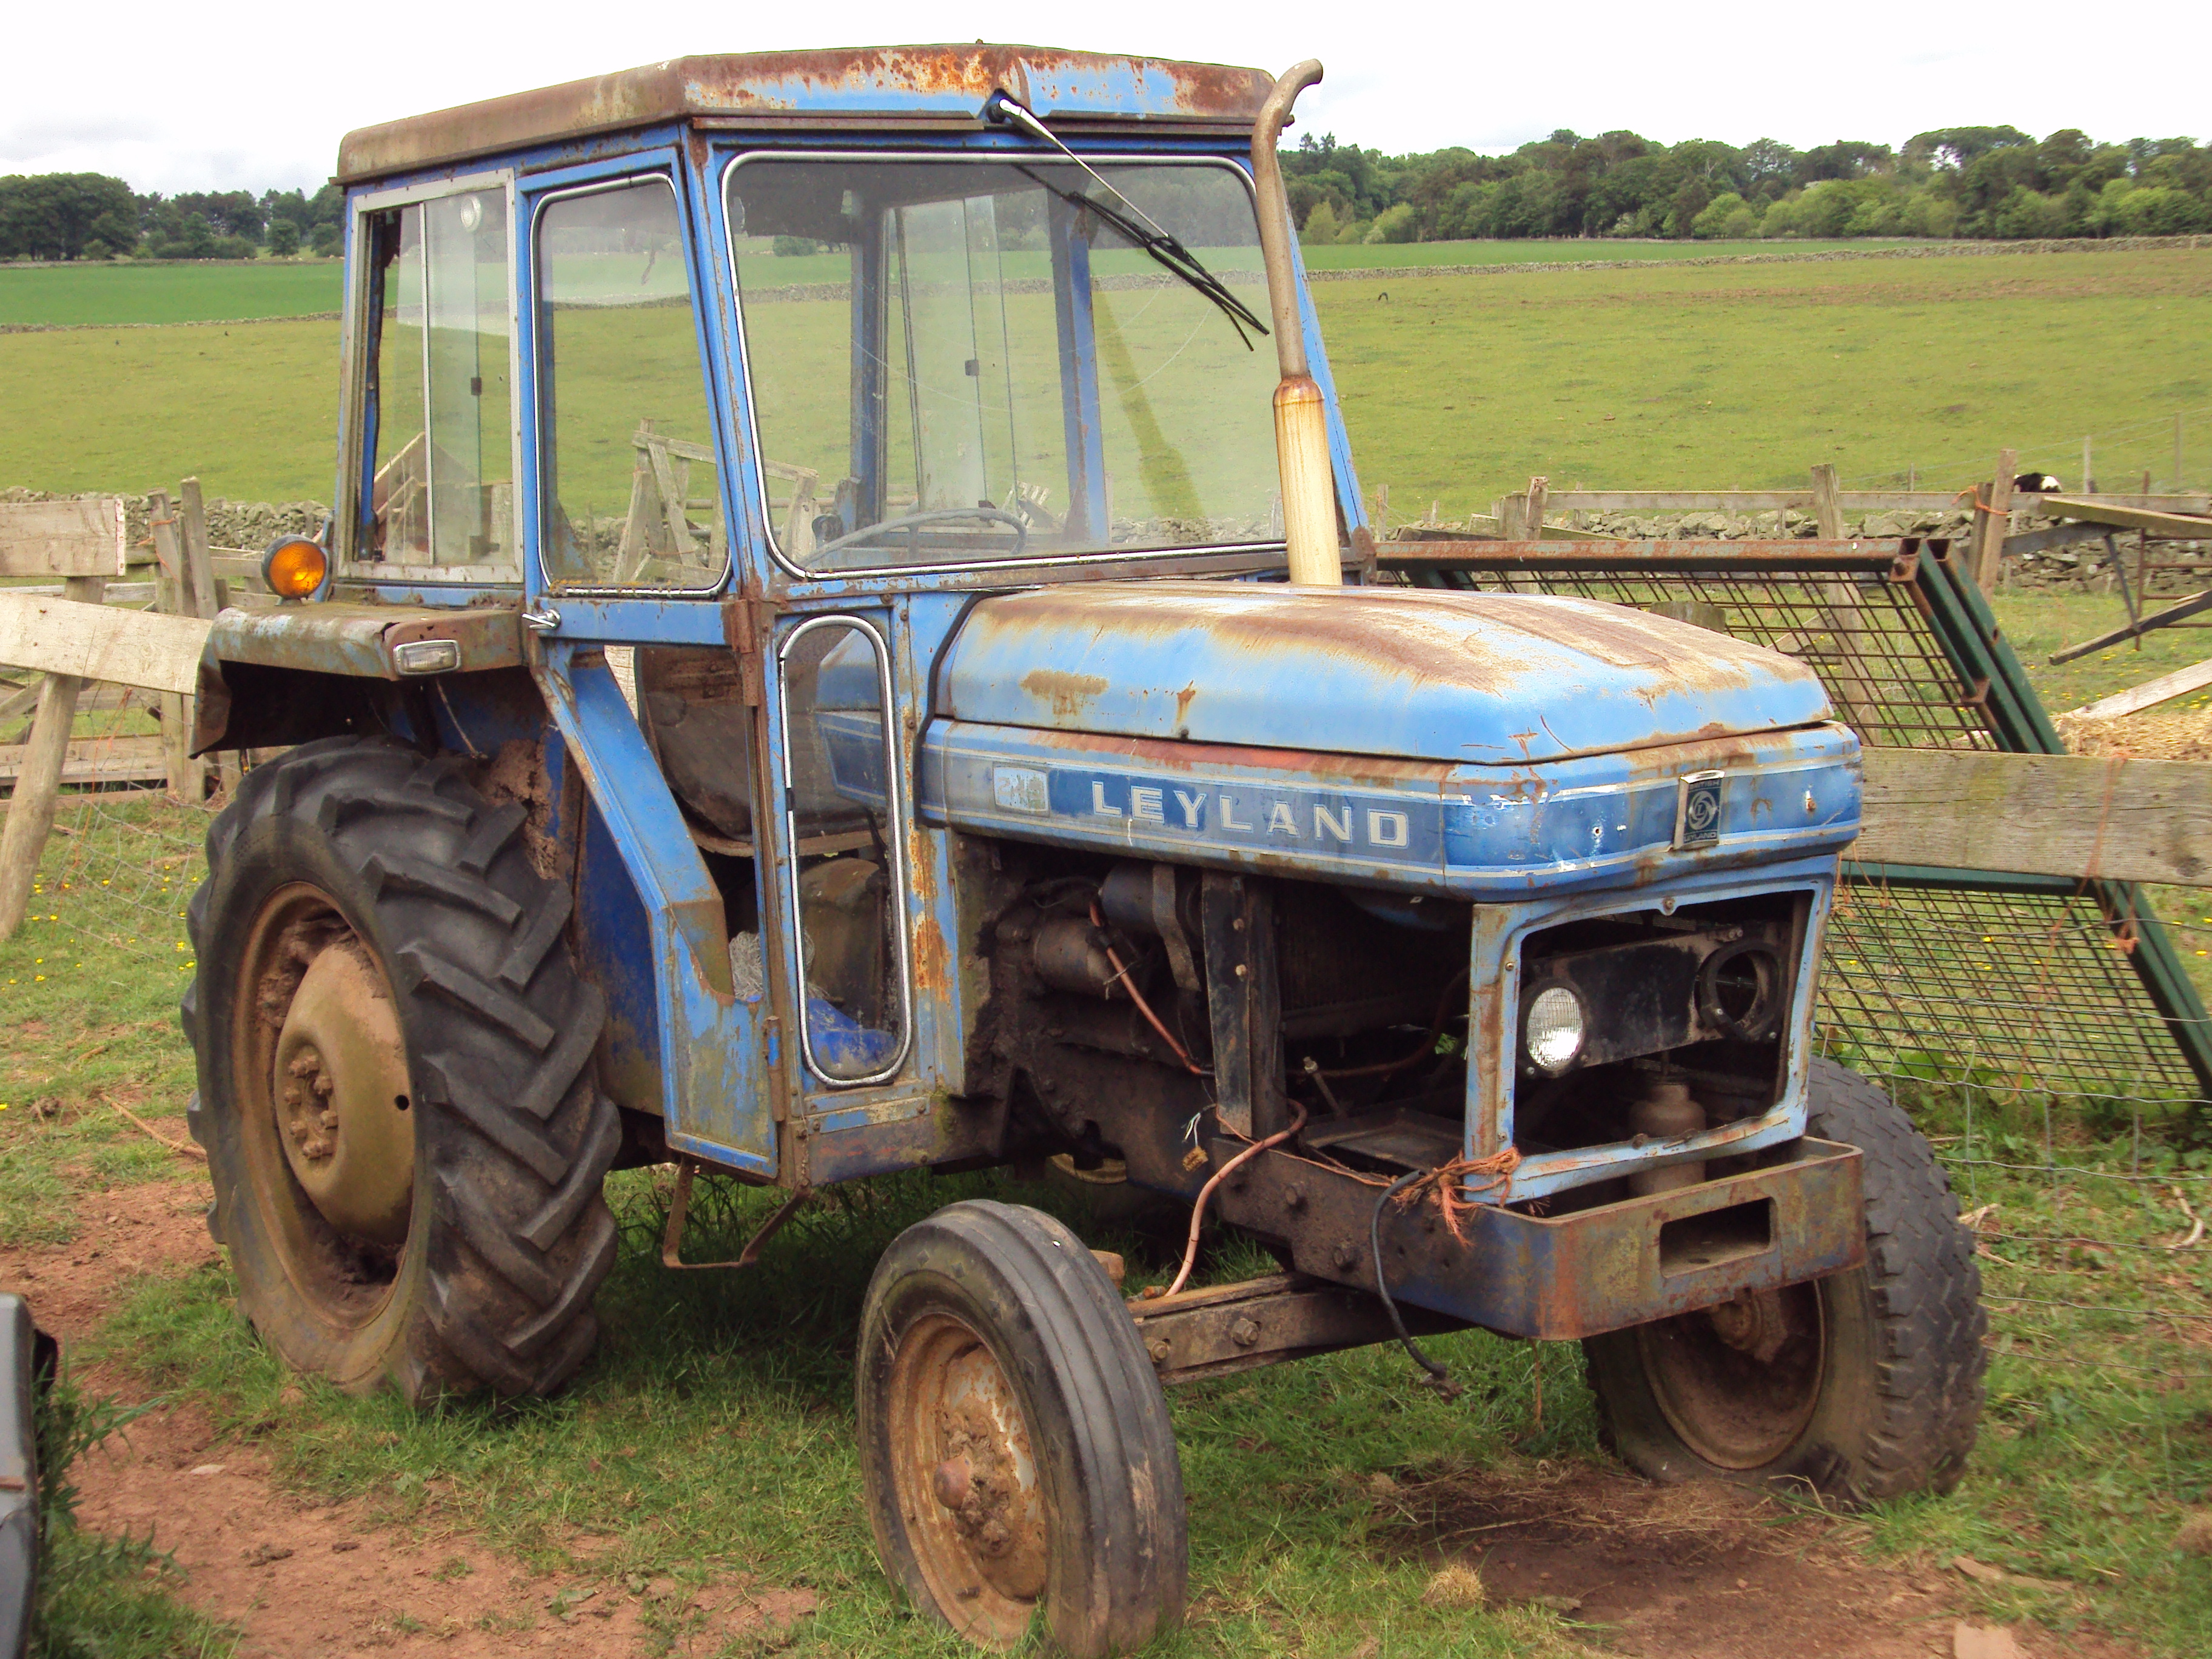 Leyland 245 - Tractor & Construction Plant Wiki - The classic vehicle ...